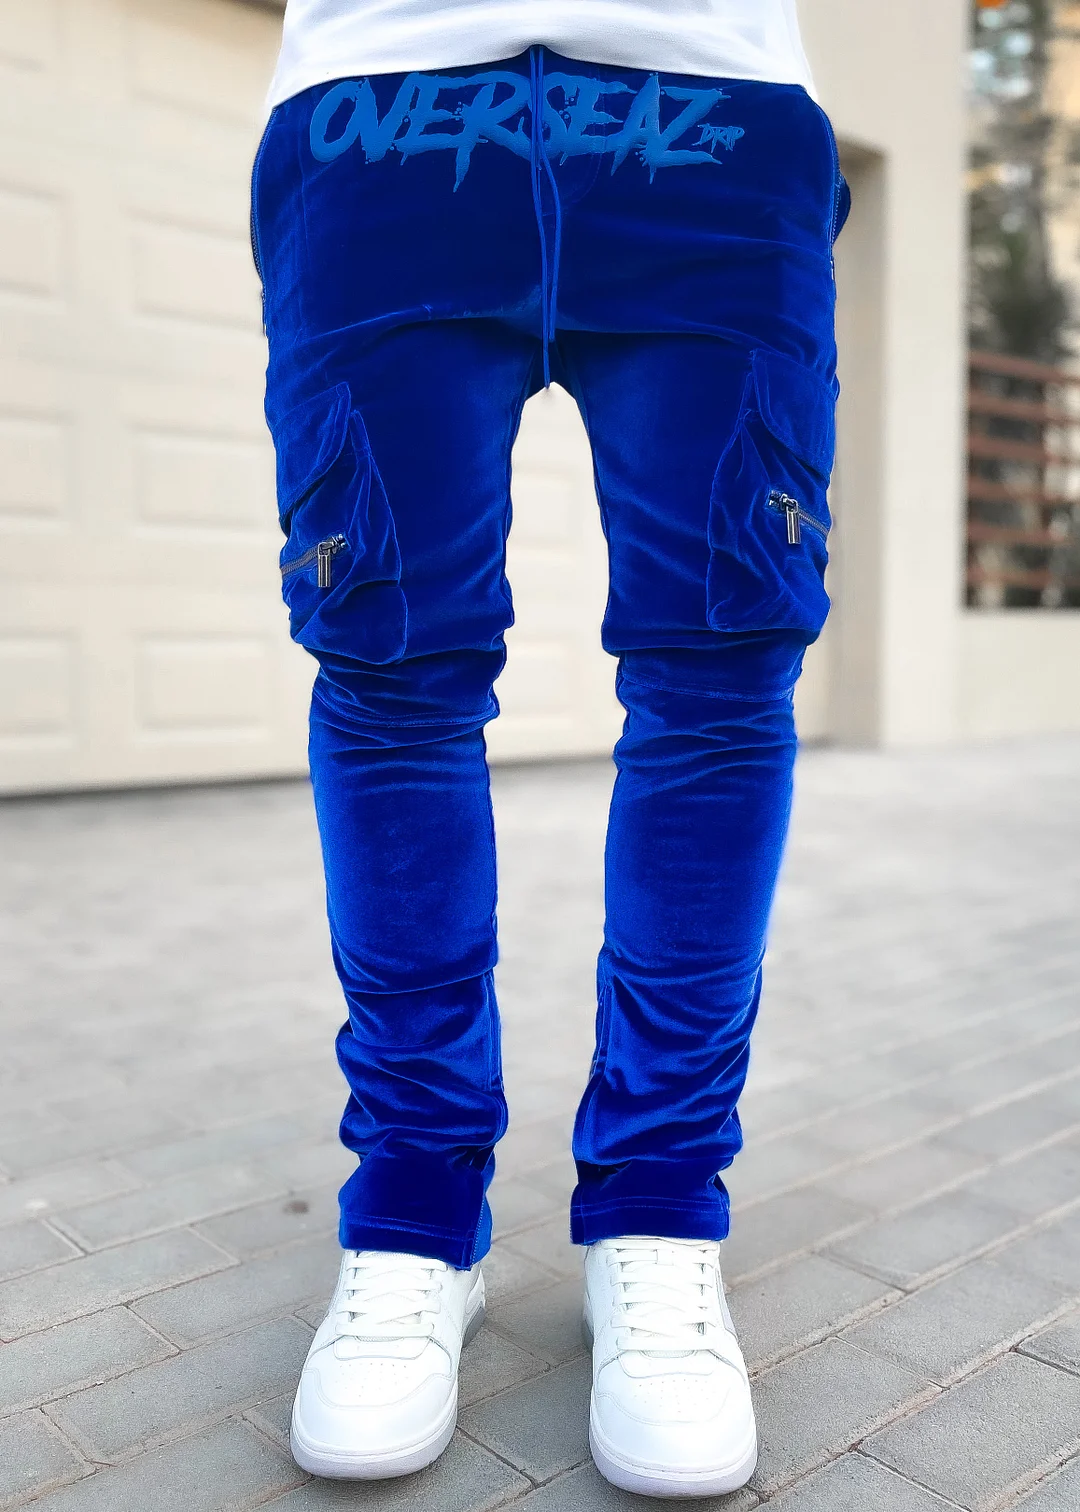 Electric Blue Overseaz Velour Track Pants